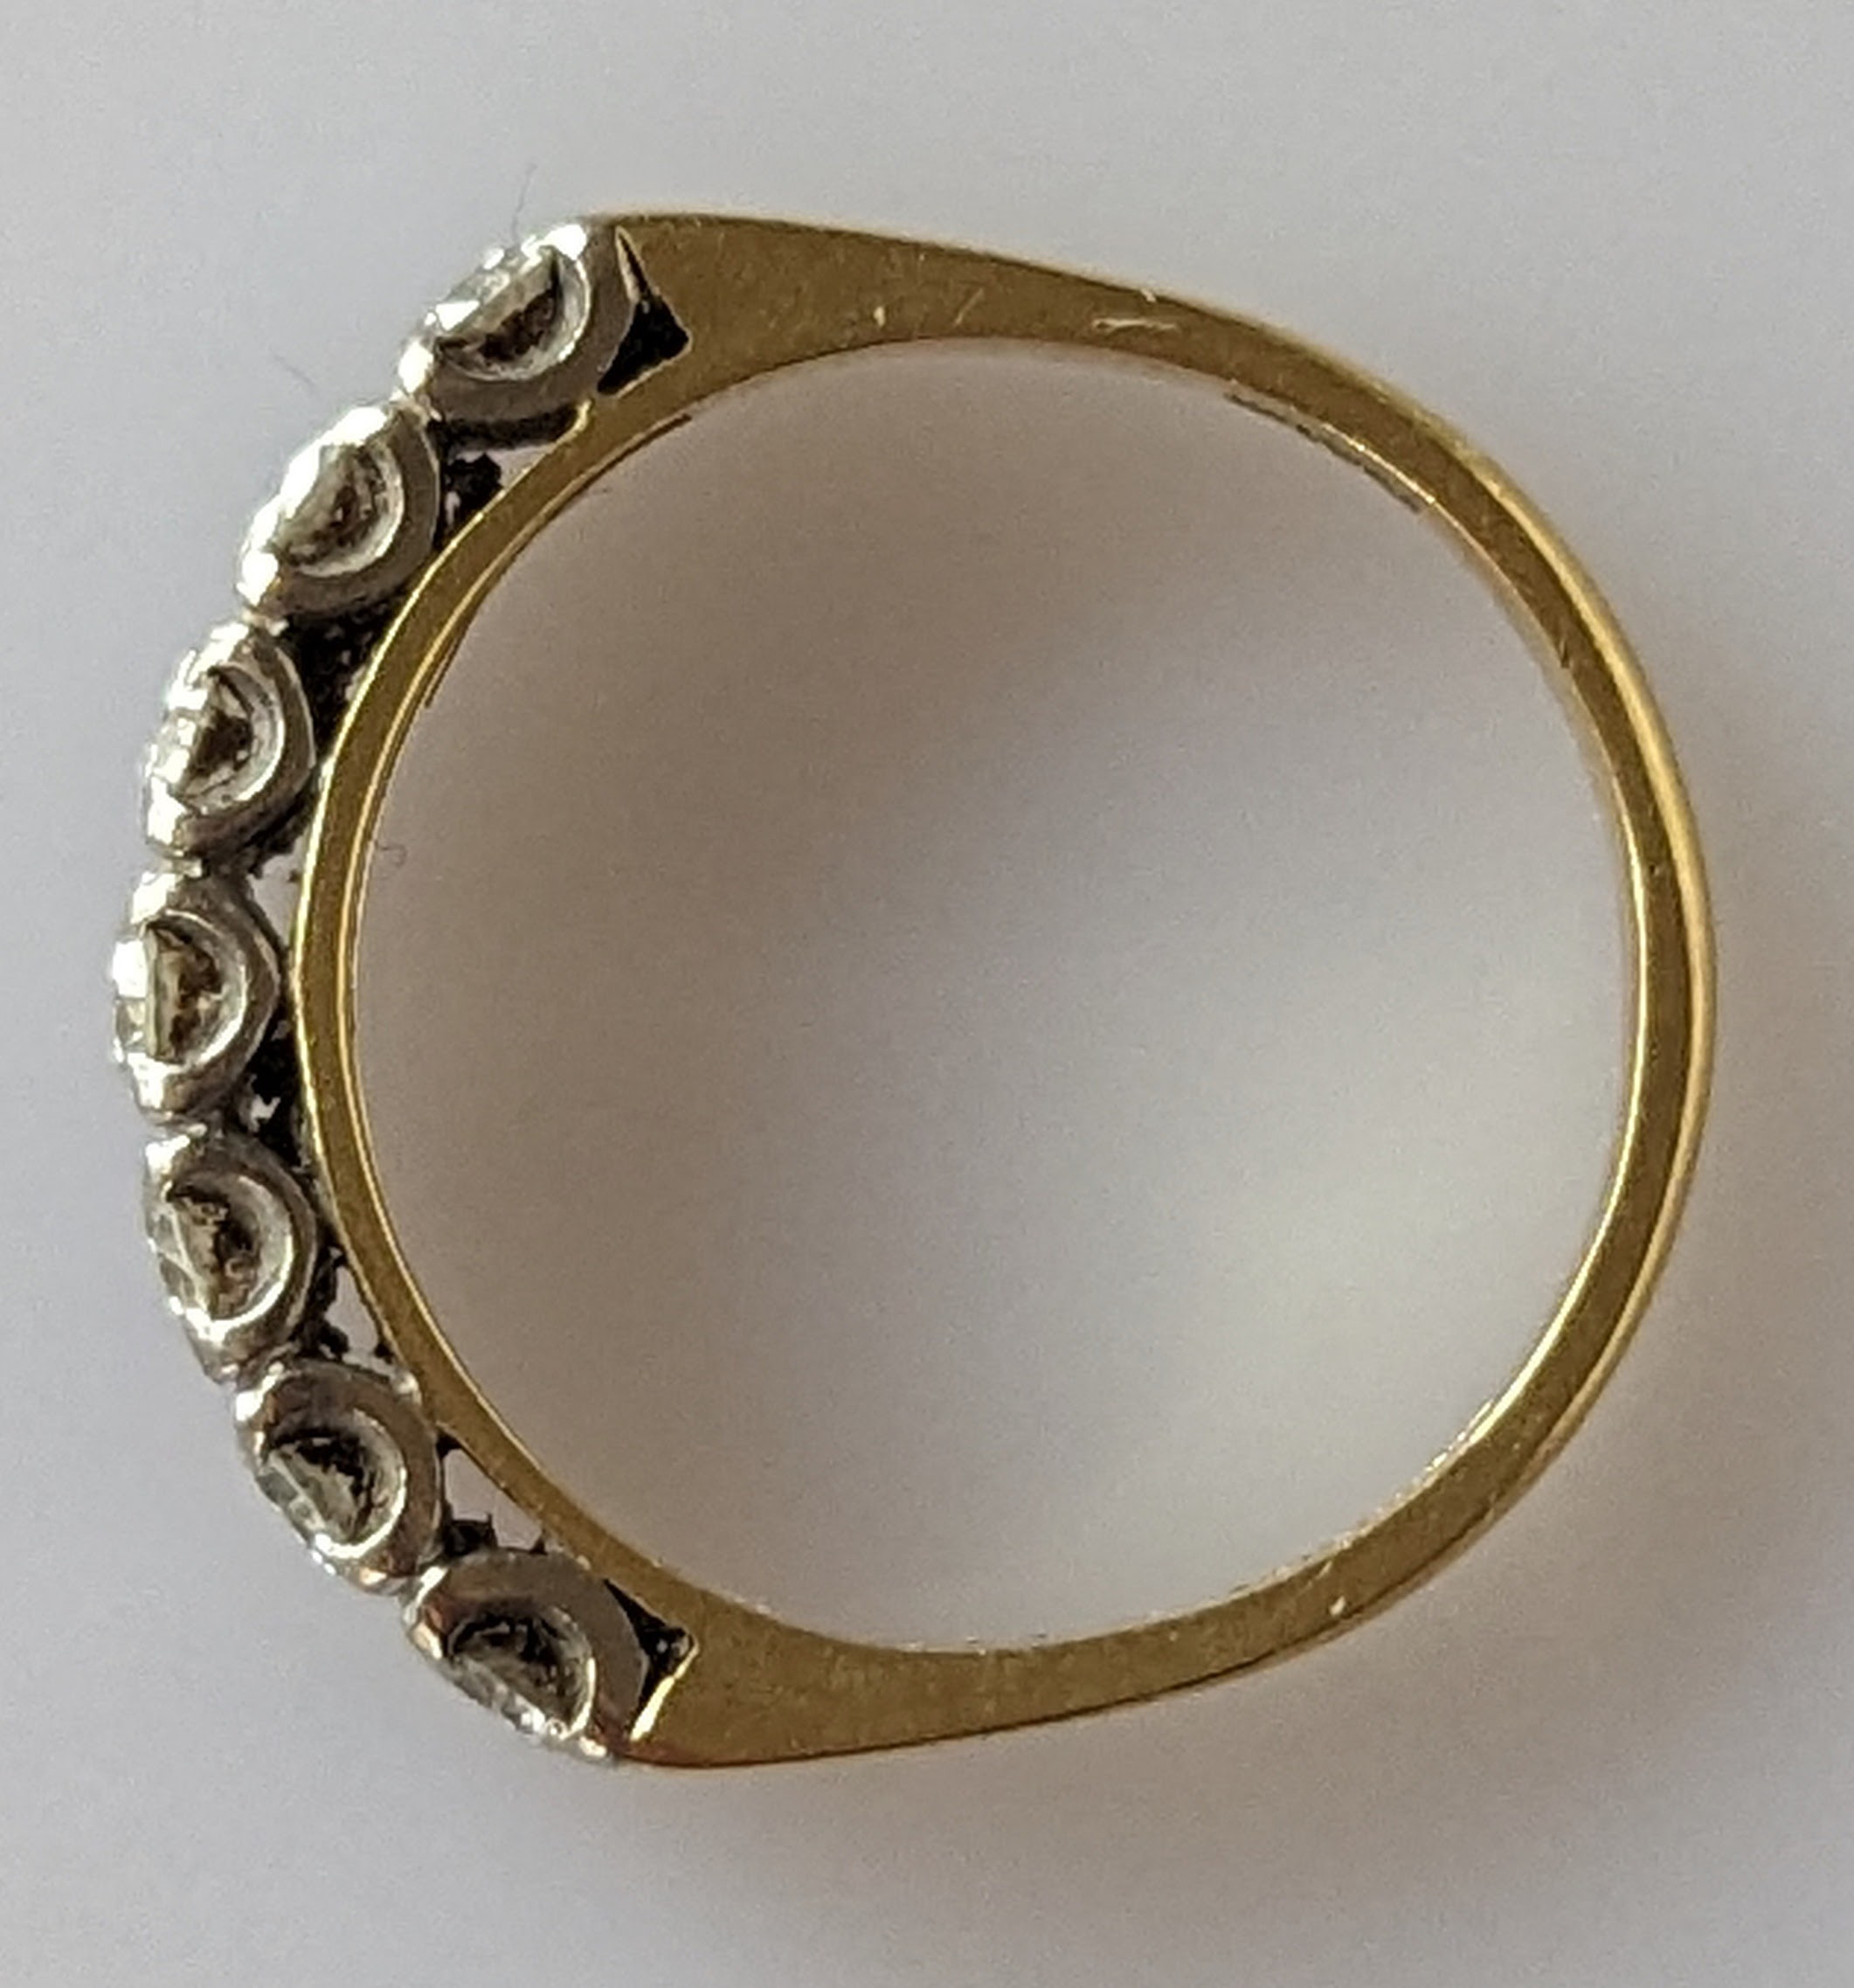 A half-hoop diamond eternity ring on a yellow gold setting - Image 3 of 3